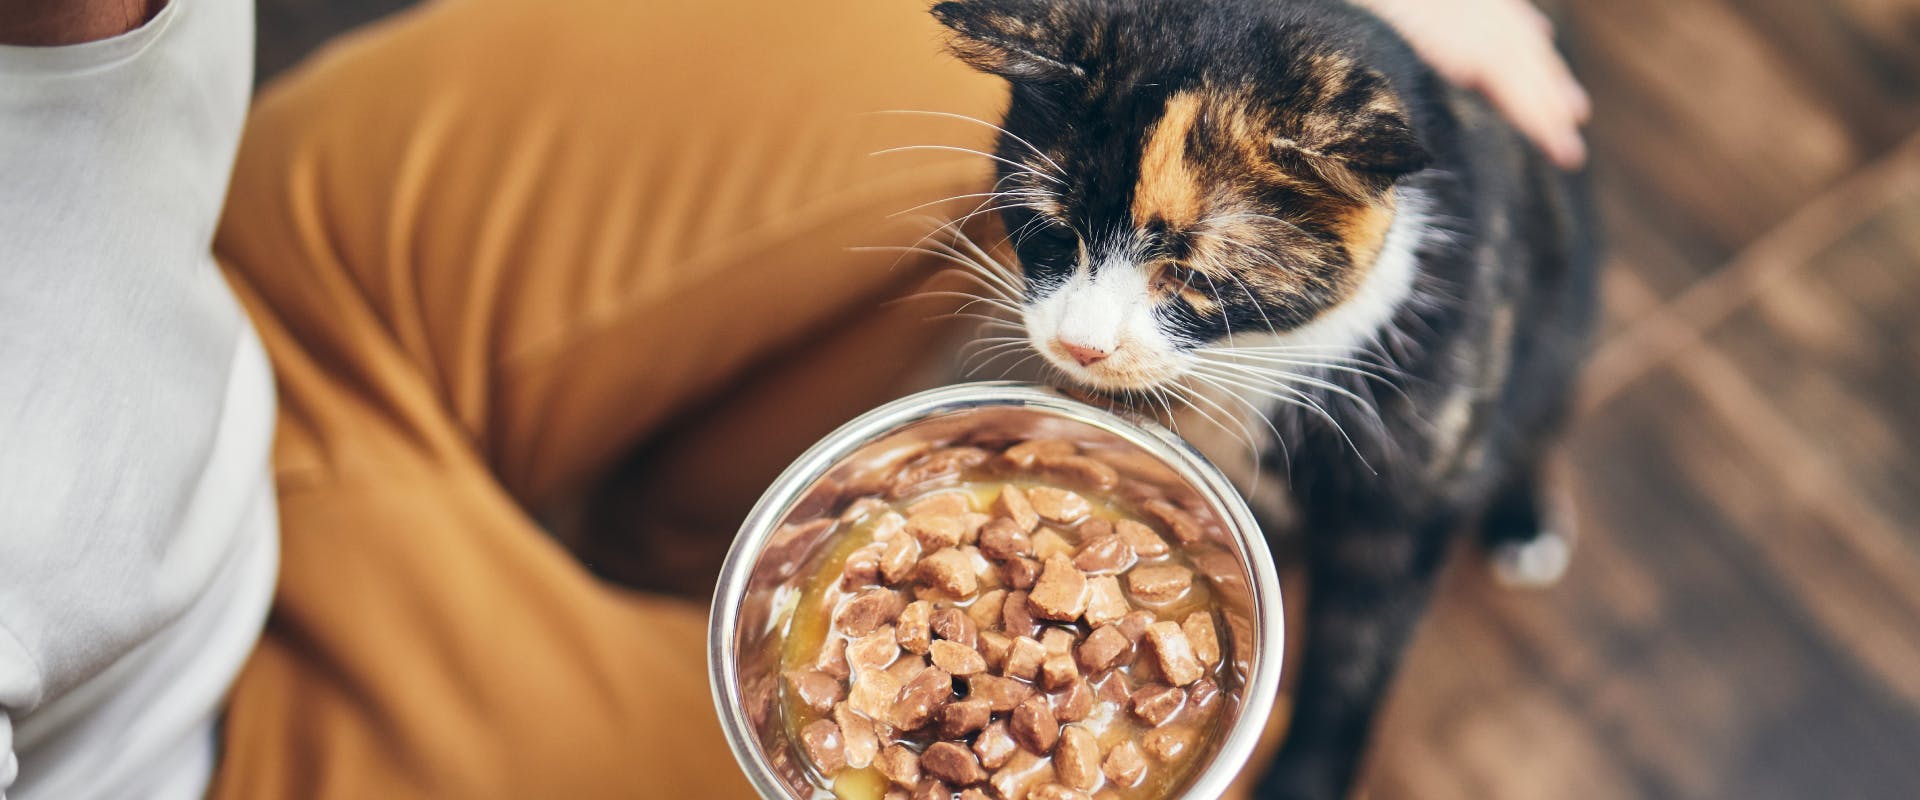 An adult cat is fed some wet cat food.